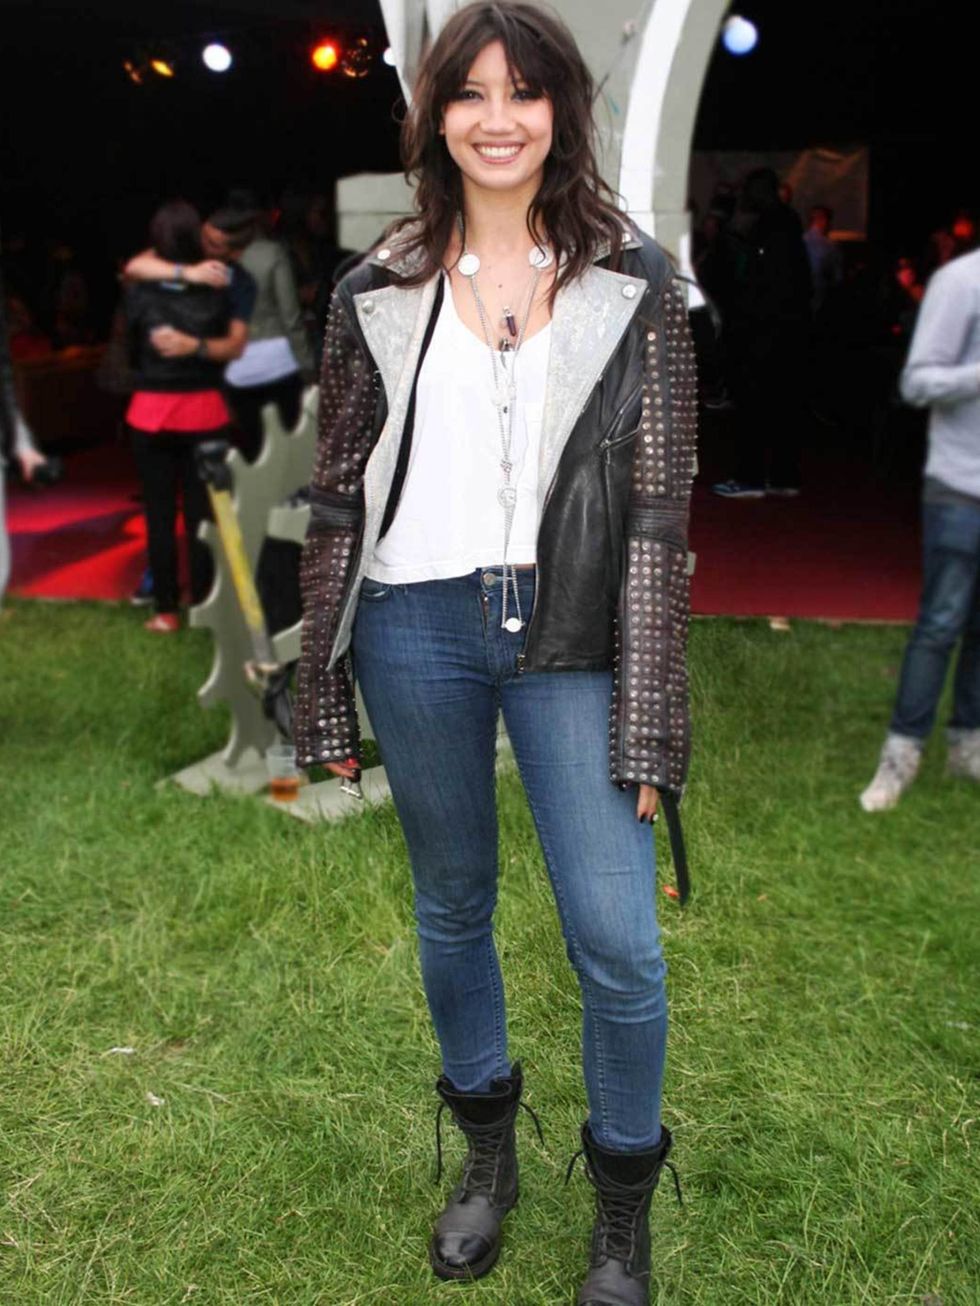 <p>Daisy Lowe, 23, Model. McQueen jacket, American Apparel top, Acne jeans and boots, Chanel necklace, Tom Binns rings.</p><p>Photos by Lisa Rahman &amp; Nikki McClarron</p>